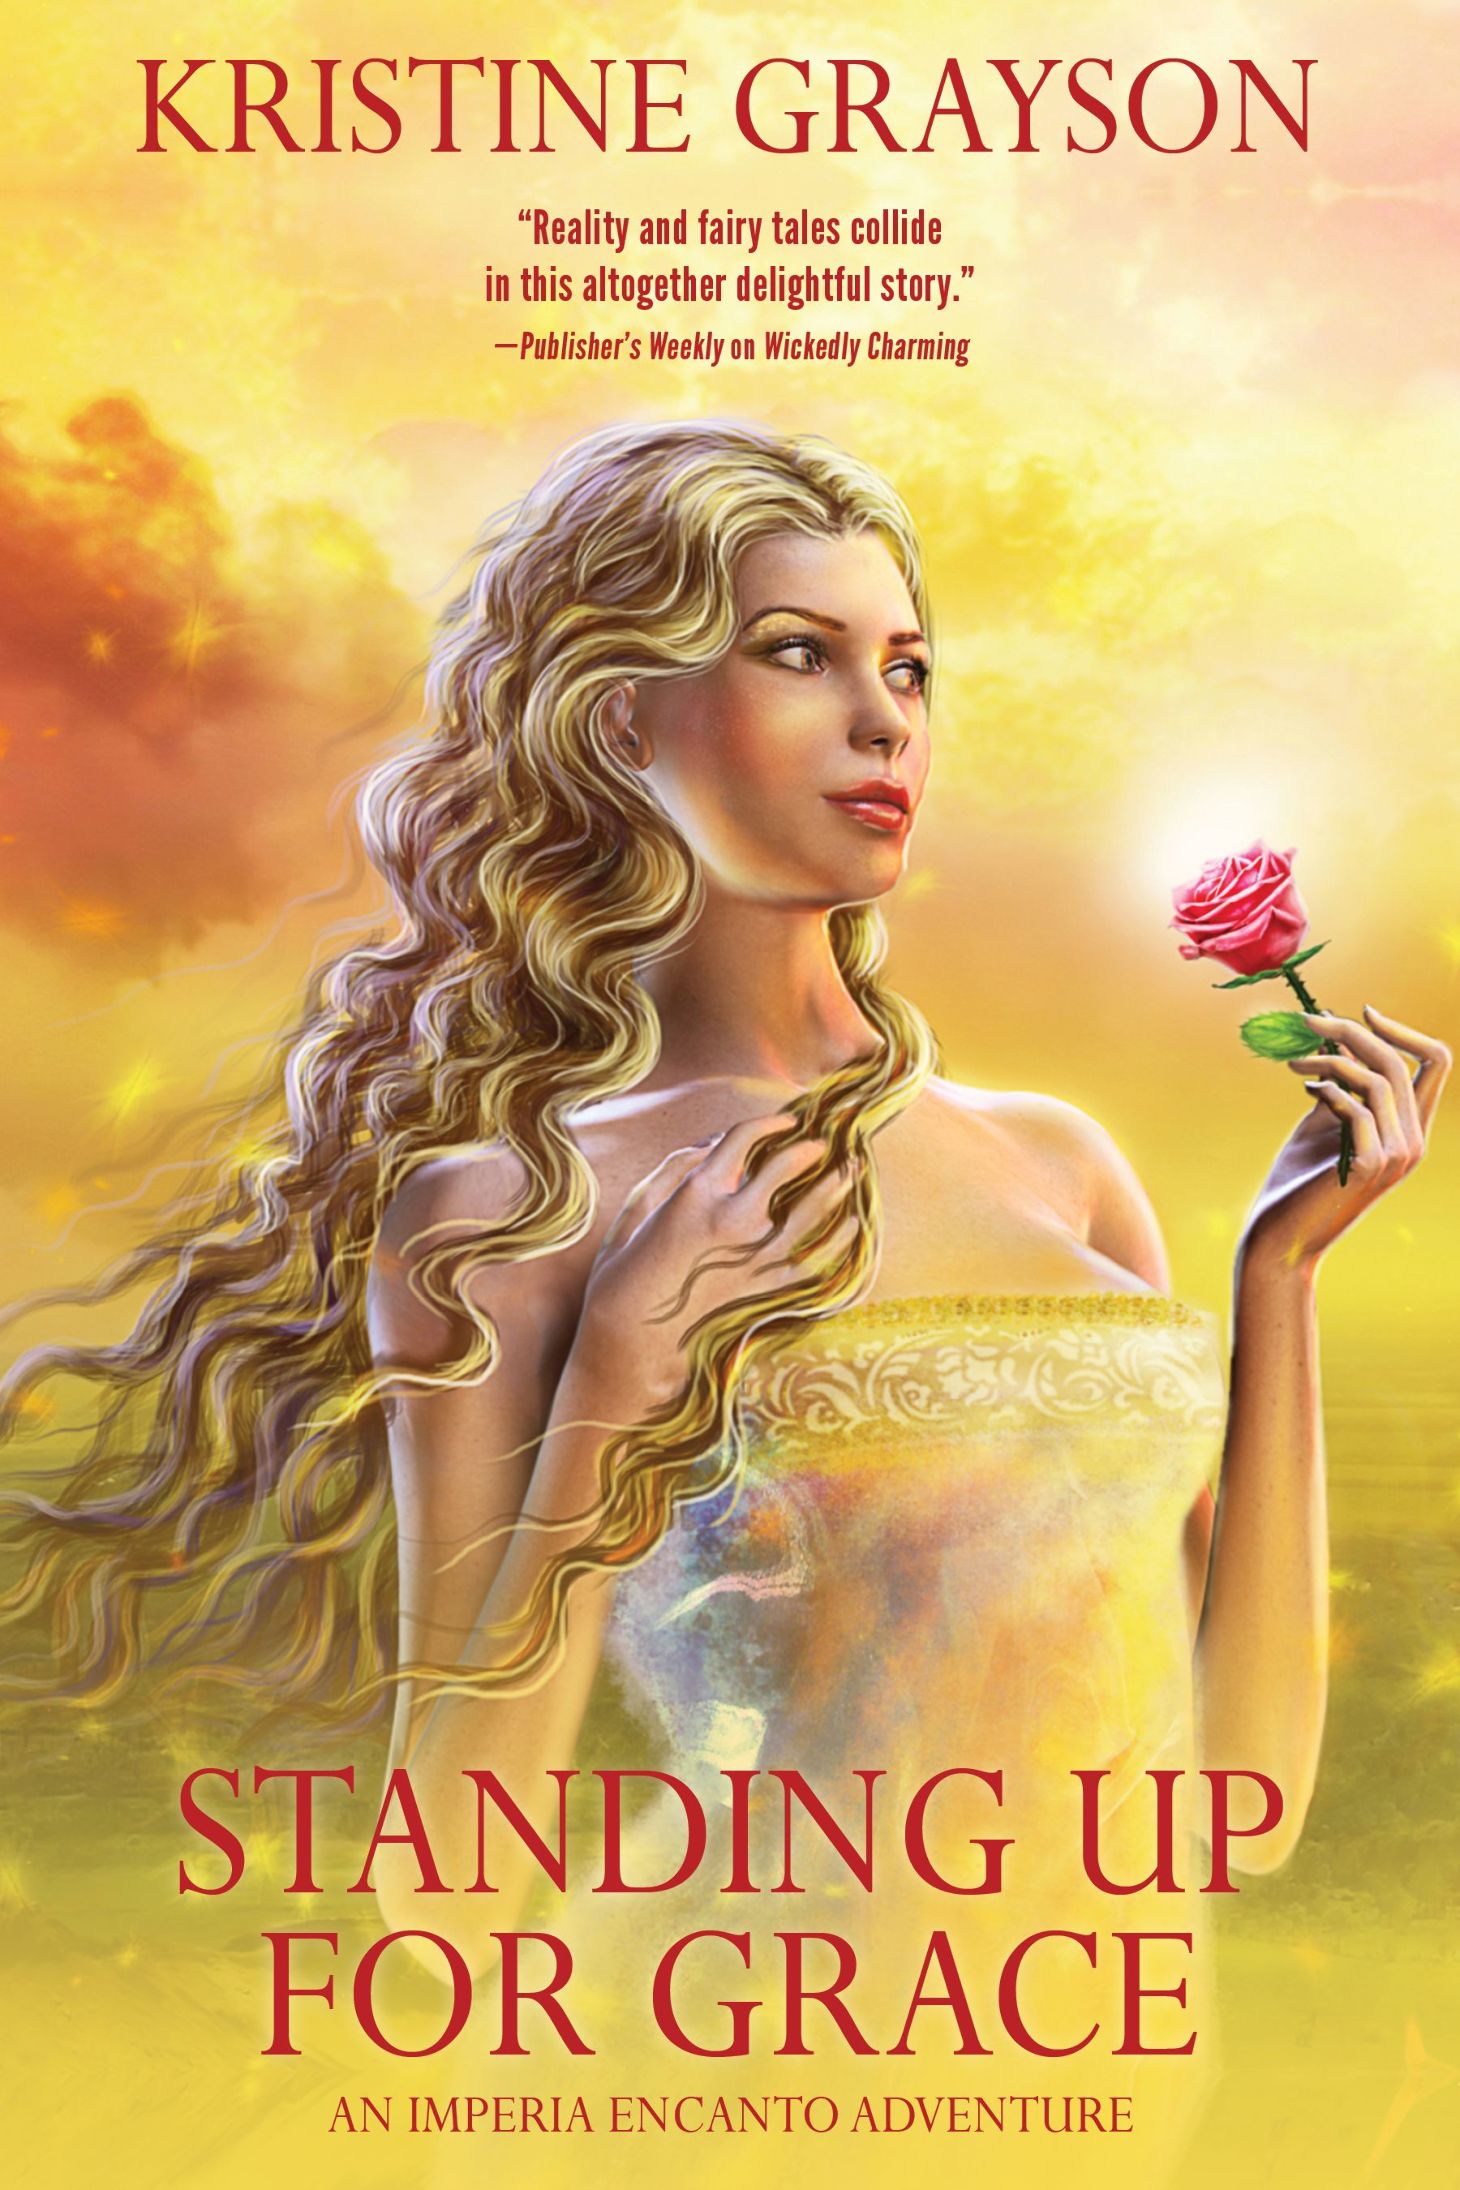 Standing Up For Grace (2015) by Kristine Grayson